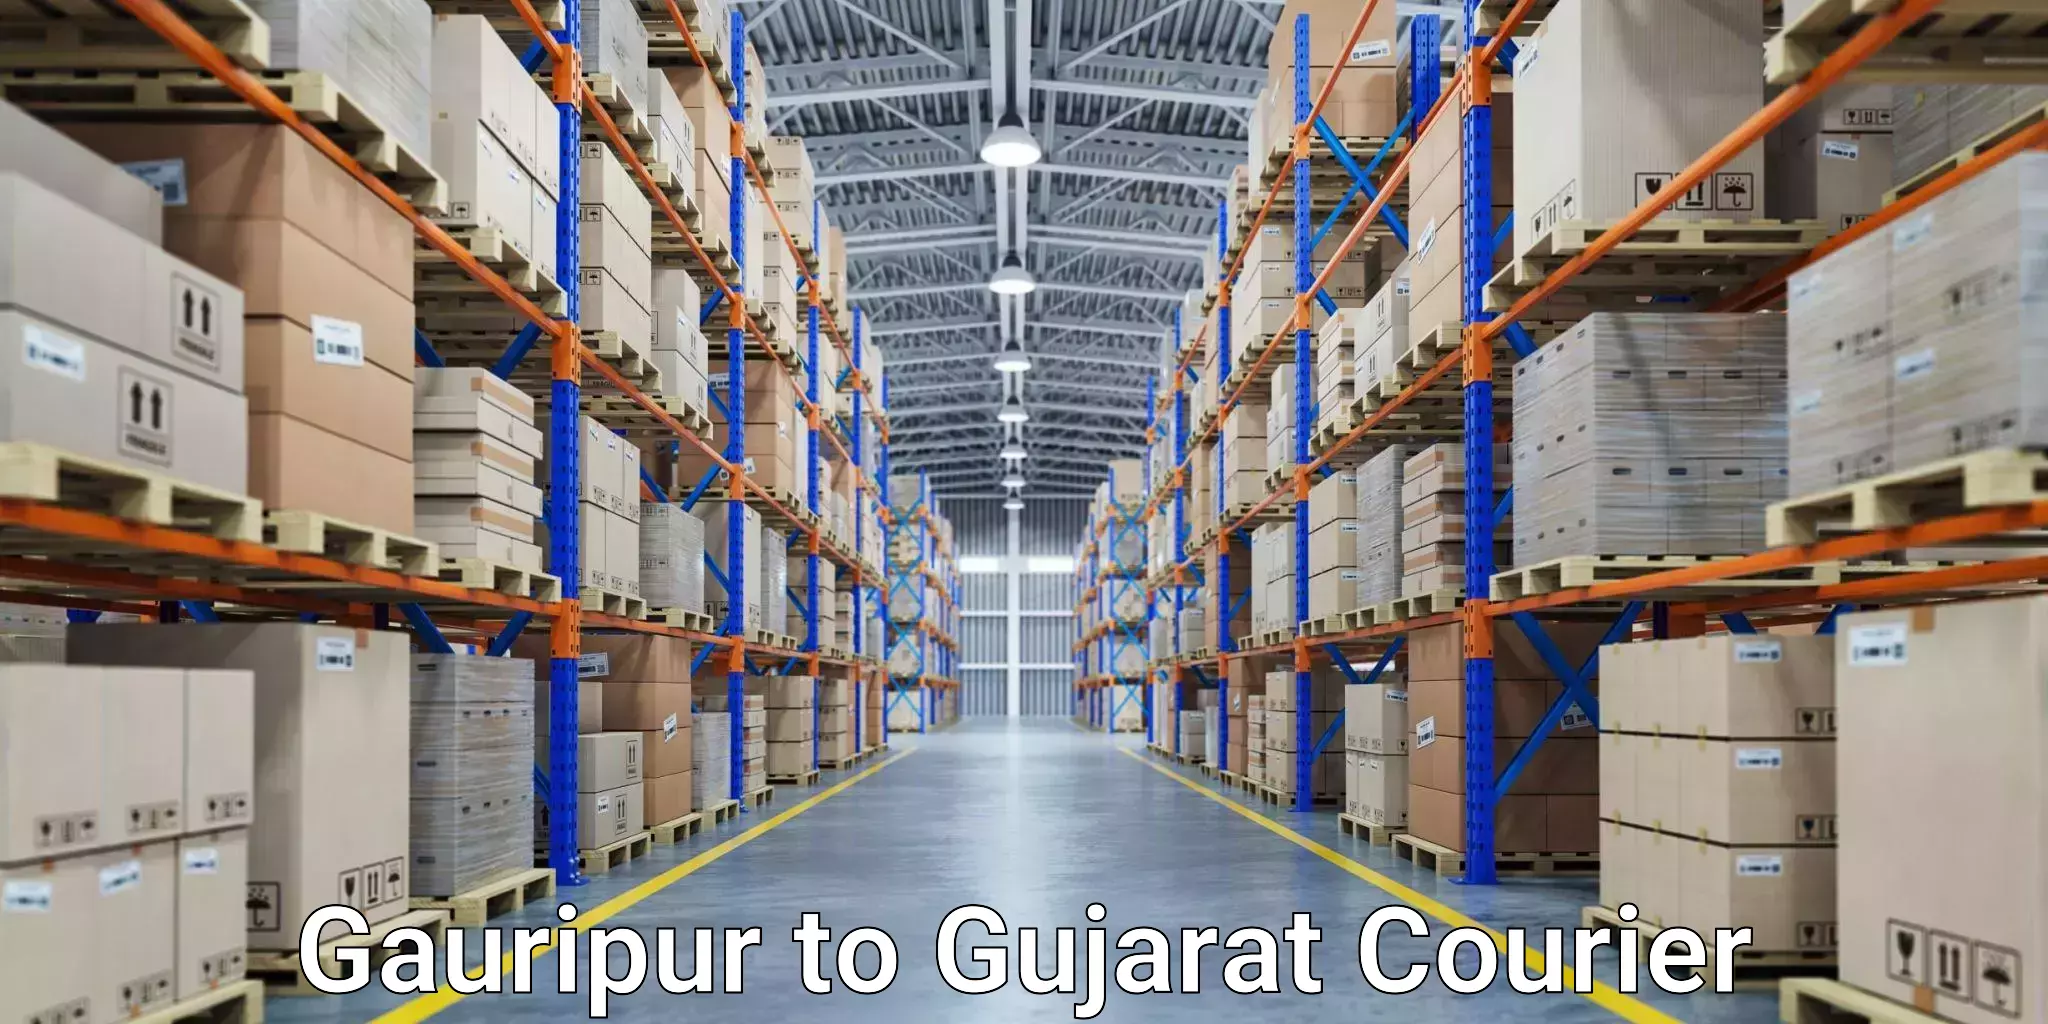 Same-day delivery solutions Gauripur to Nadiad